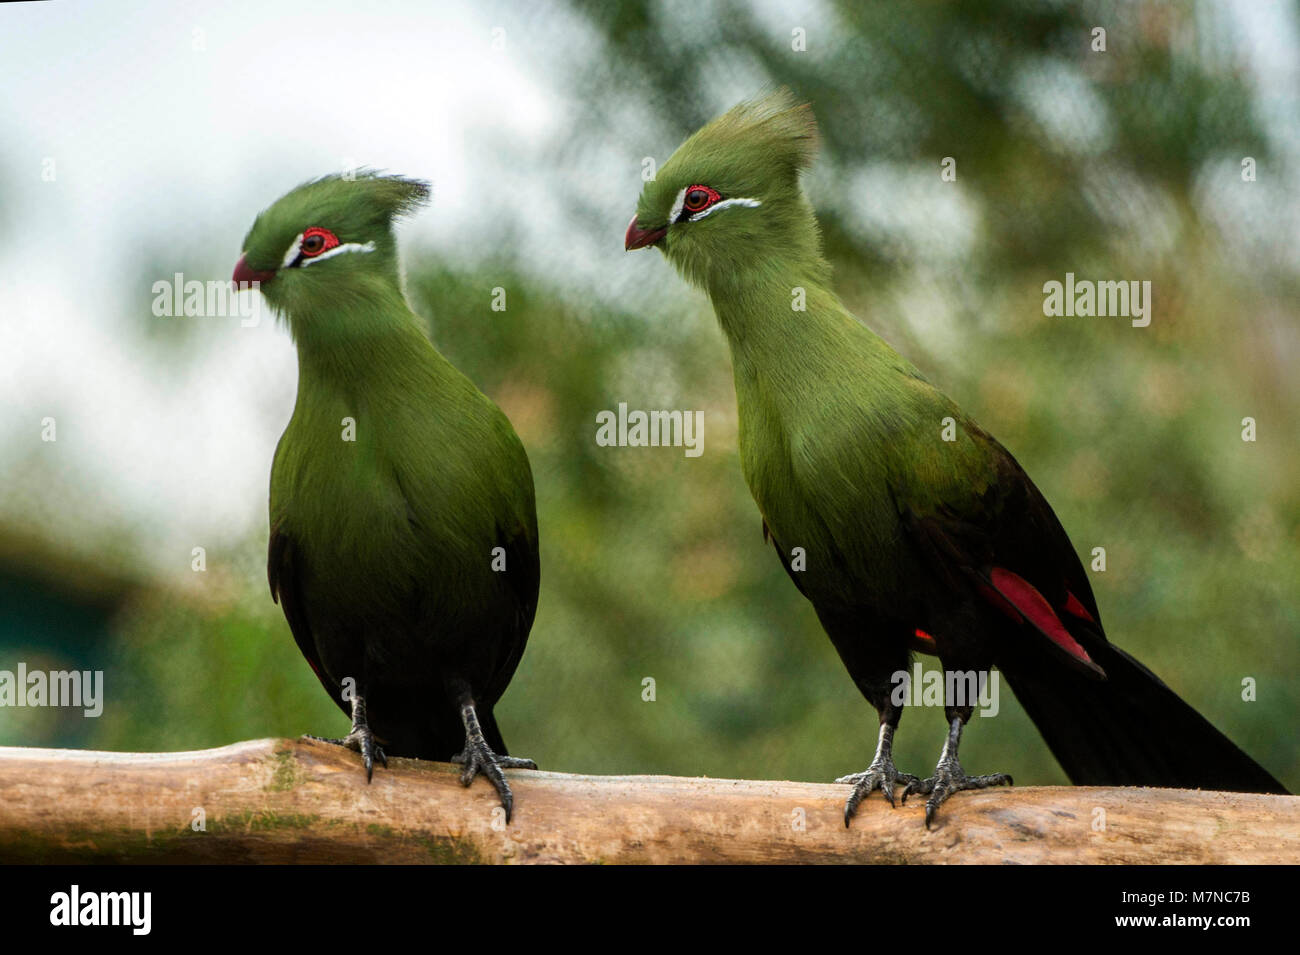 West African Green Turaco (Tauraco persa) portrait Stock Photo